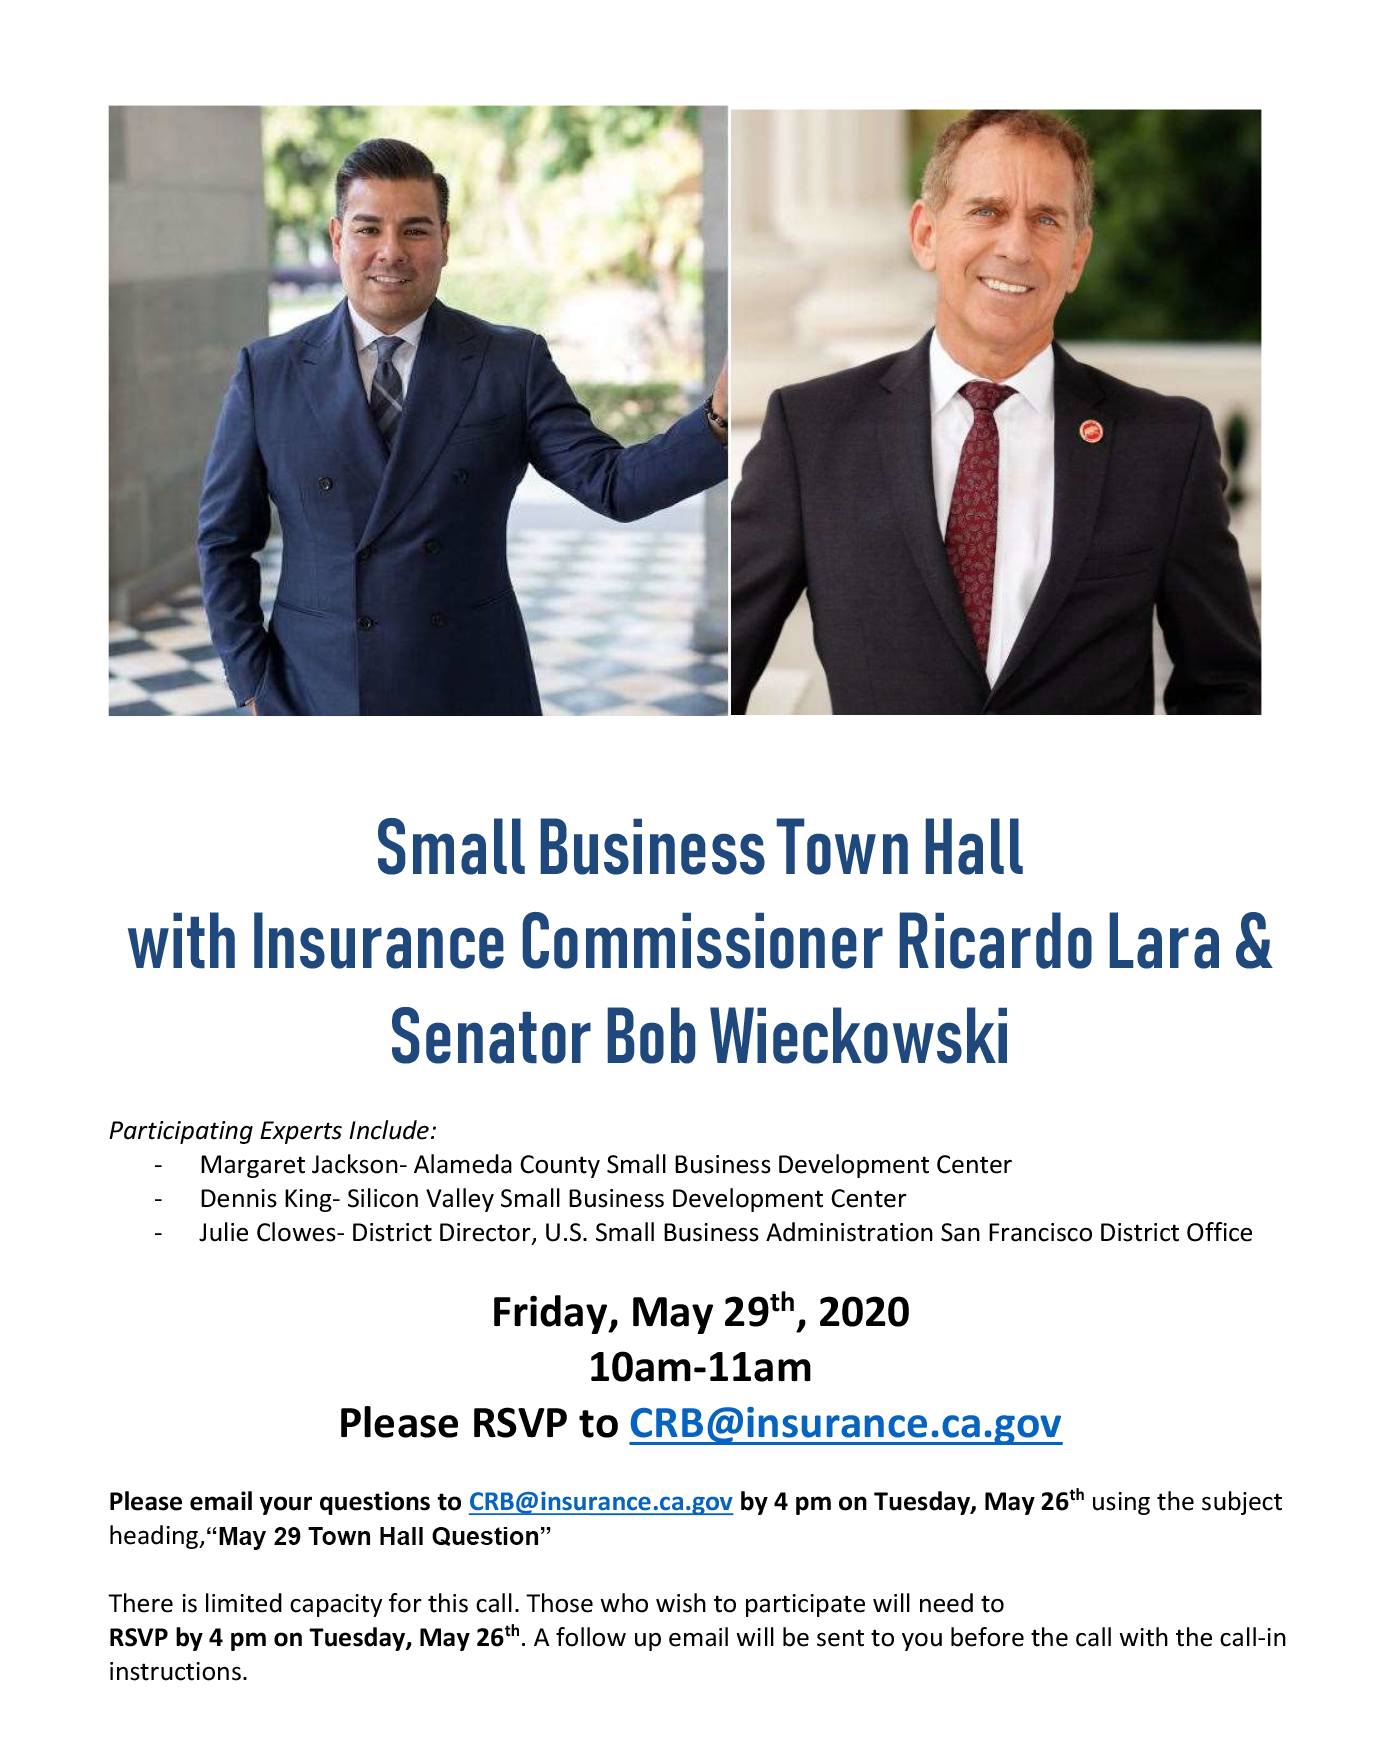 Small Business Town Hall with insurance commissioner Ricardo Lara and senator bob wieckowski. Friday, May 29, 2020 at 10am to 11am. Please RSVP to crb@insurance.ca.gov 